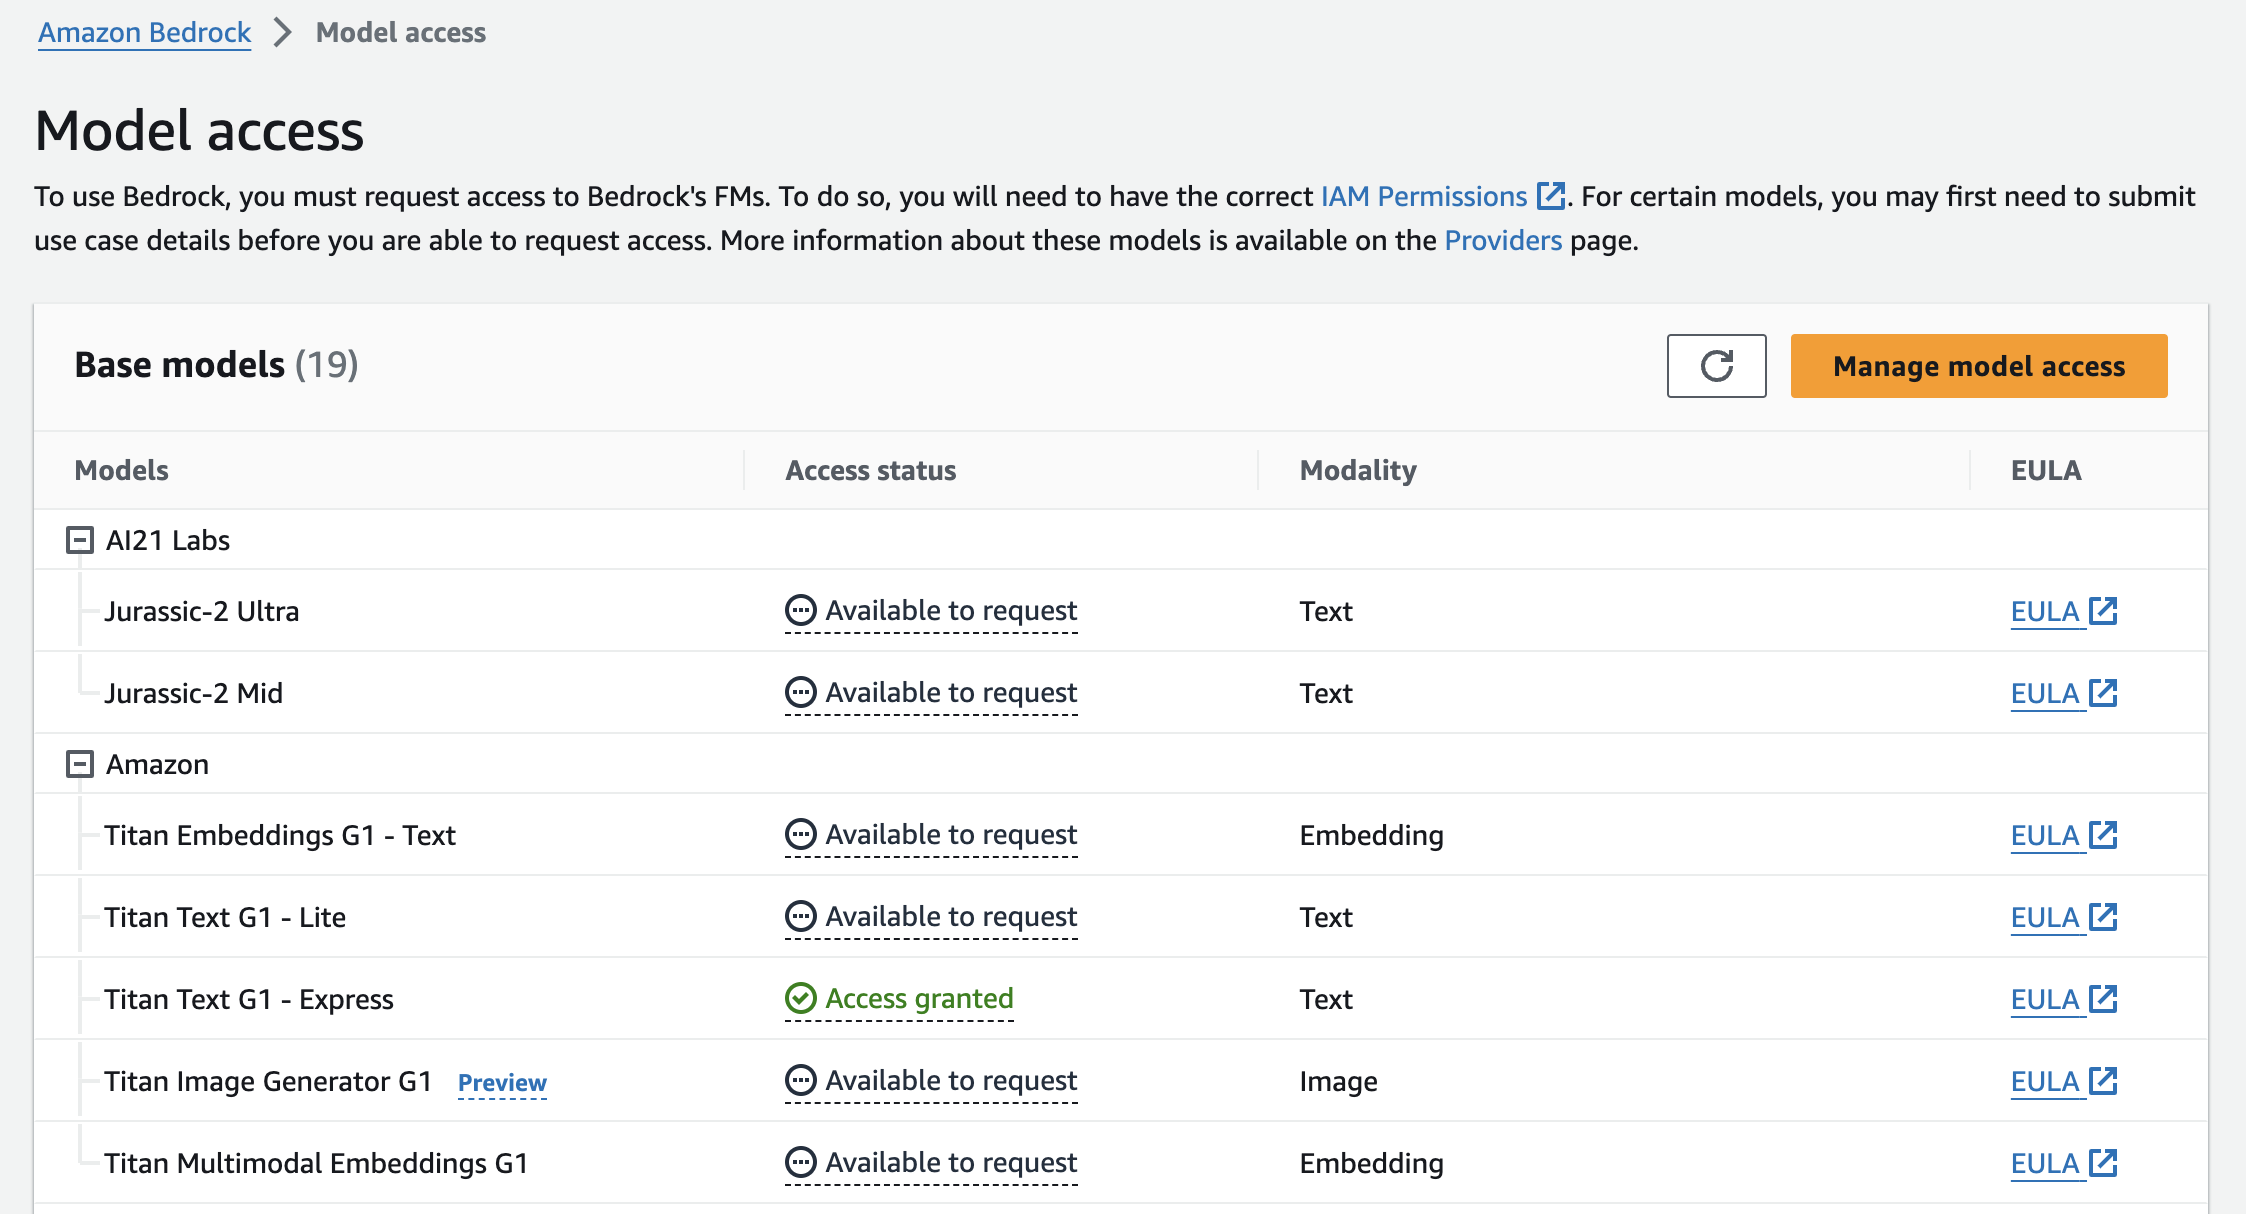 Model access page in AWS Console with model names and an orange &lsquo;Manage model access&rsquo; button